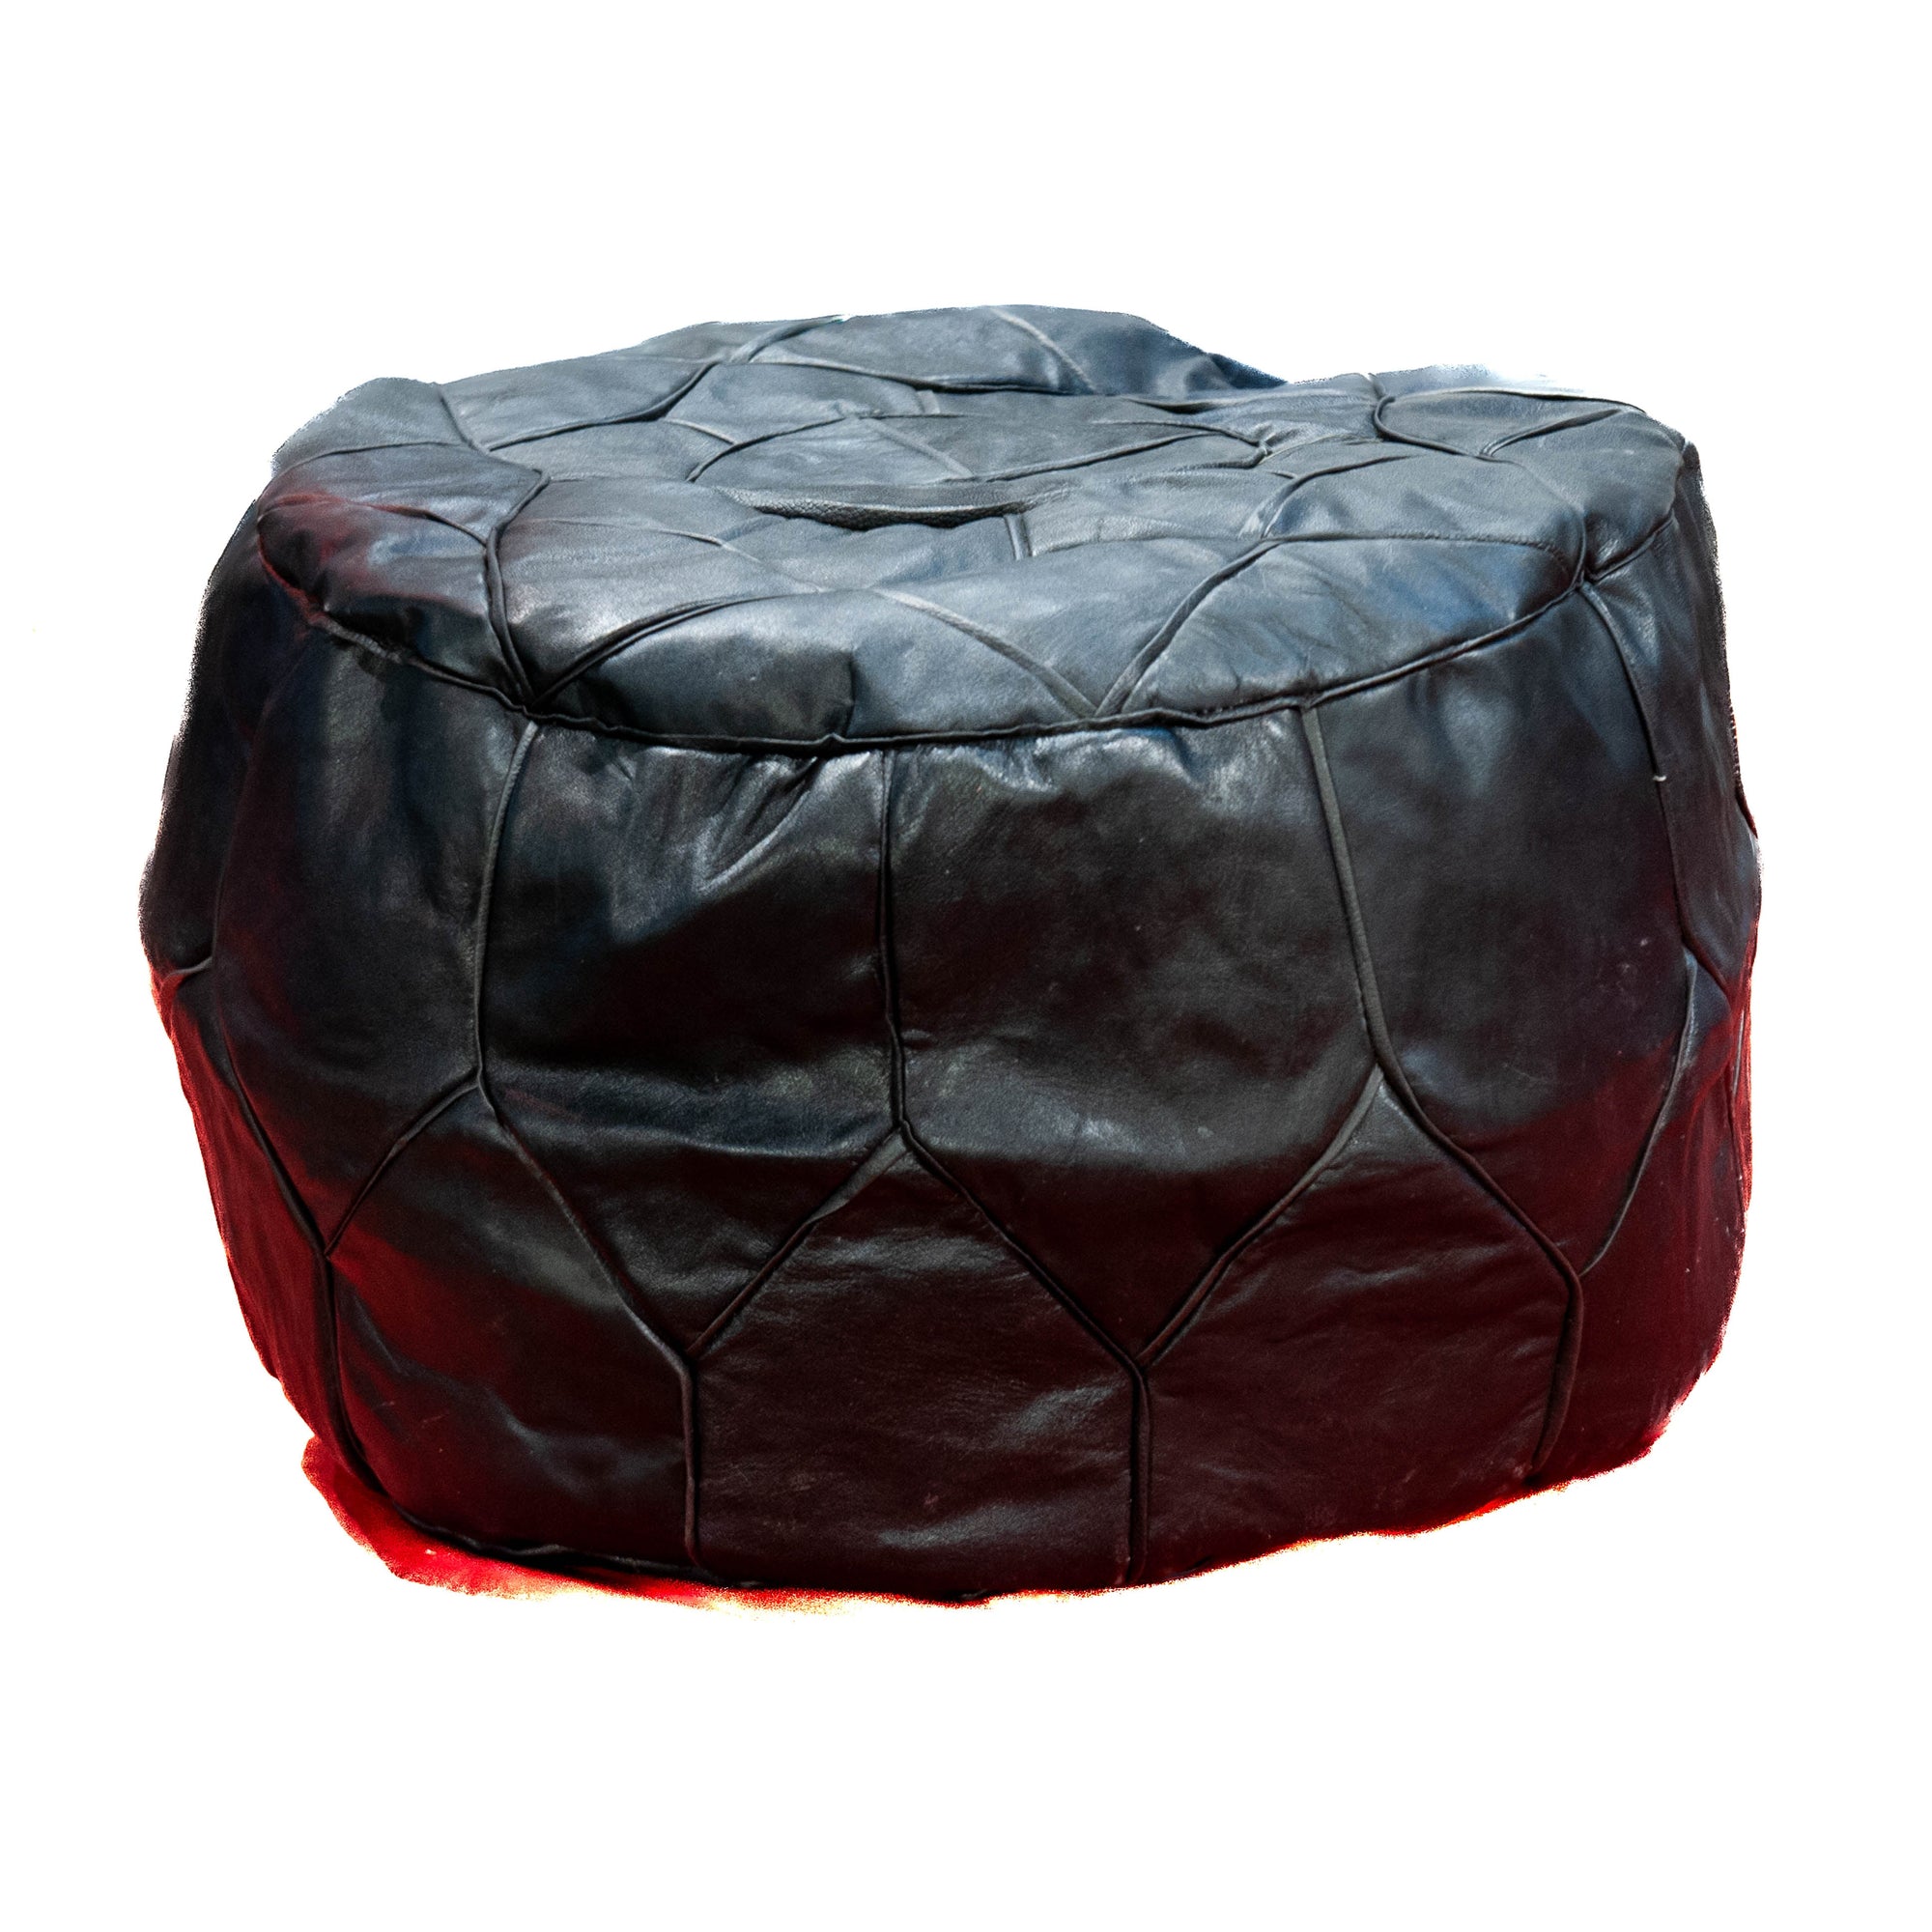 Egyptian Leather Smooth Pouf - Large